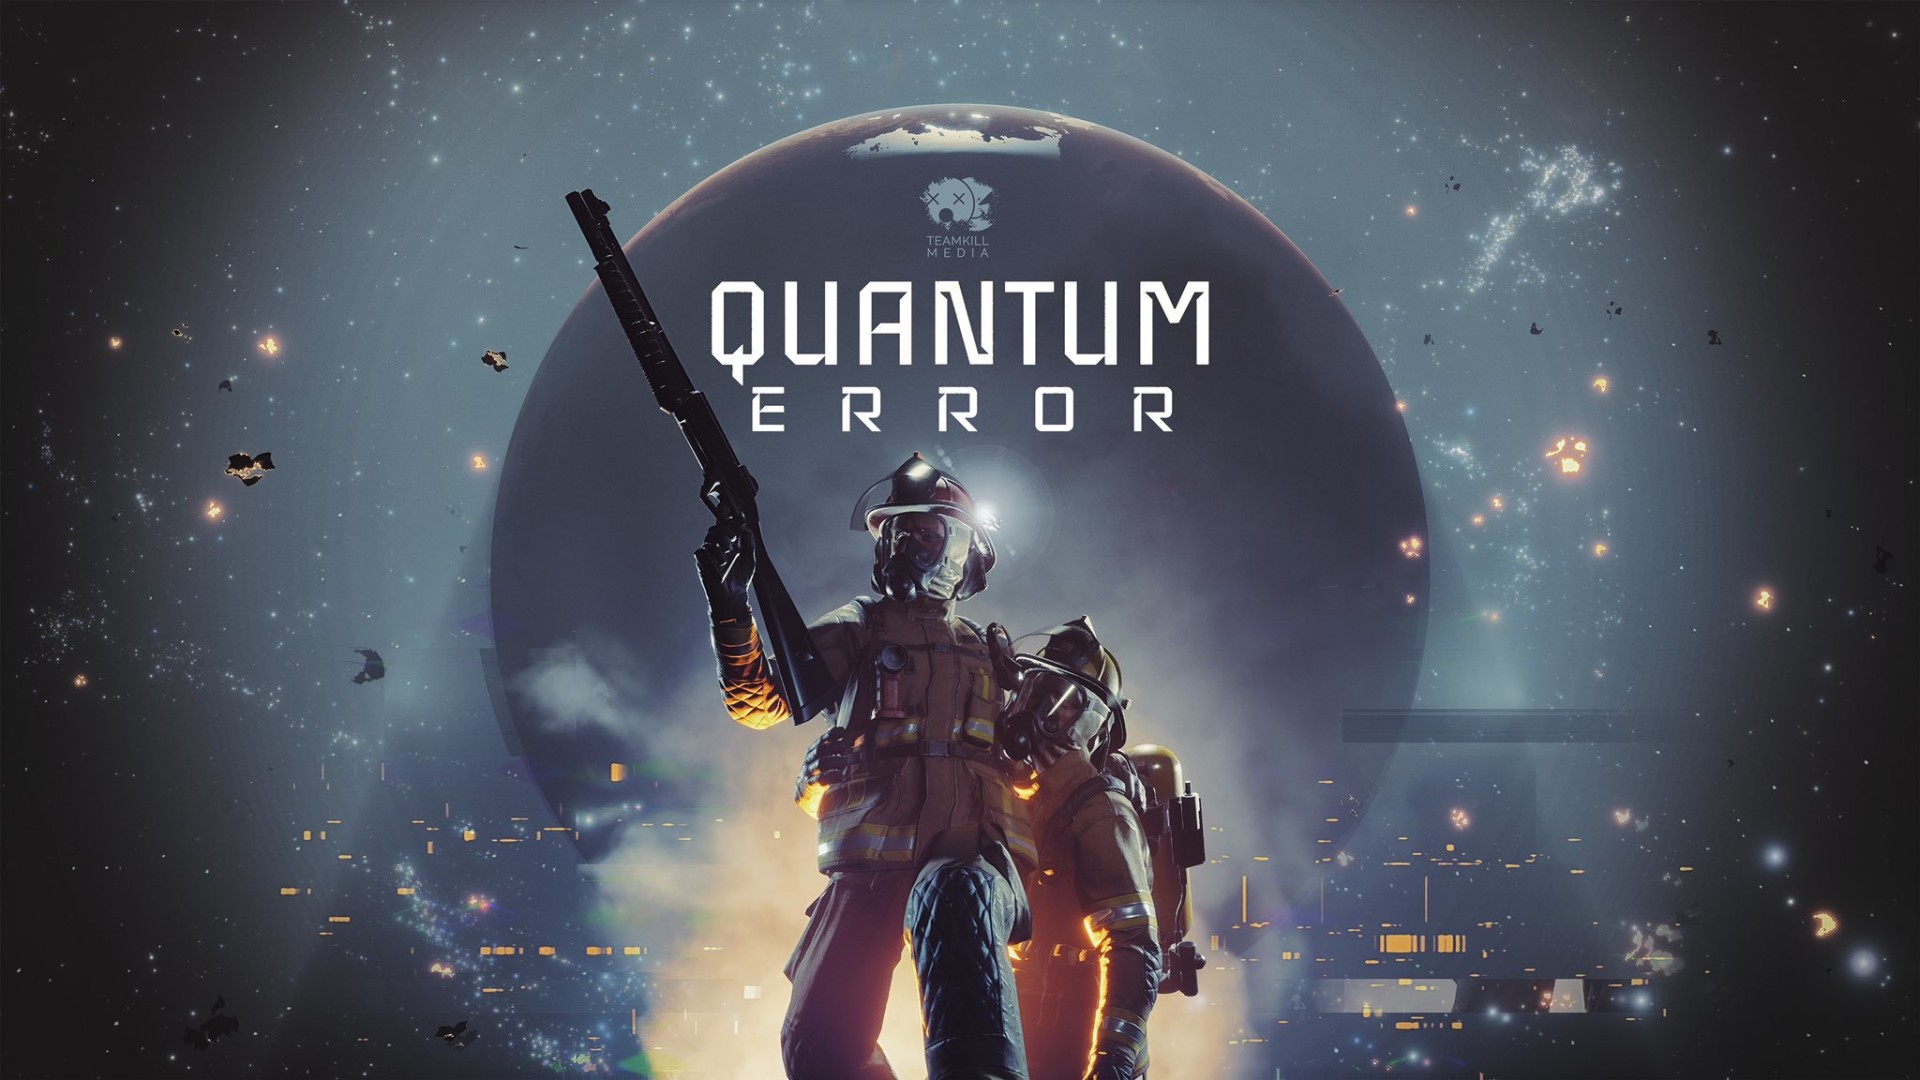 Quantum Error Gameplay Video Shows off Weapons, Enemies, Vehicles, and More